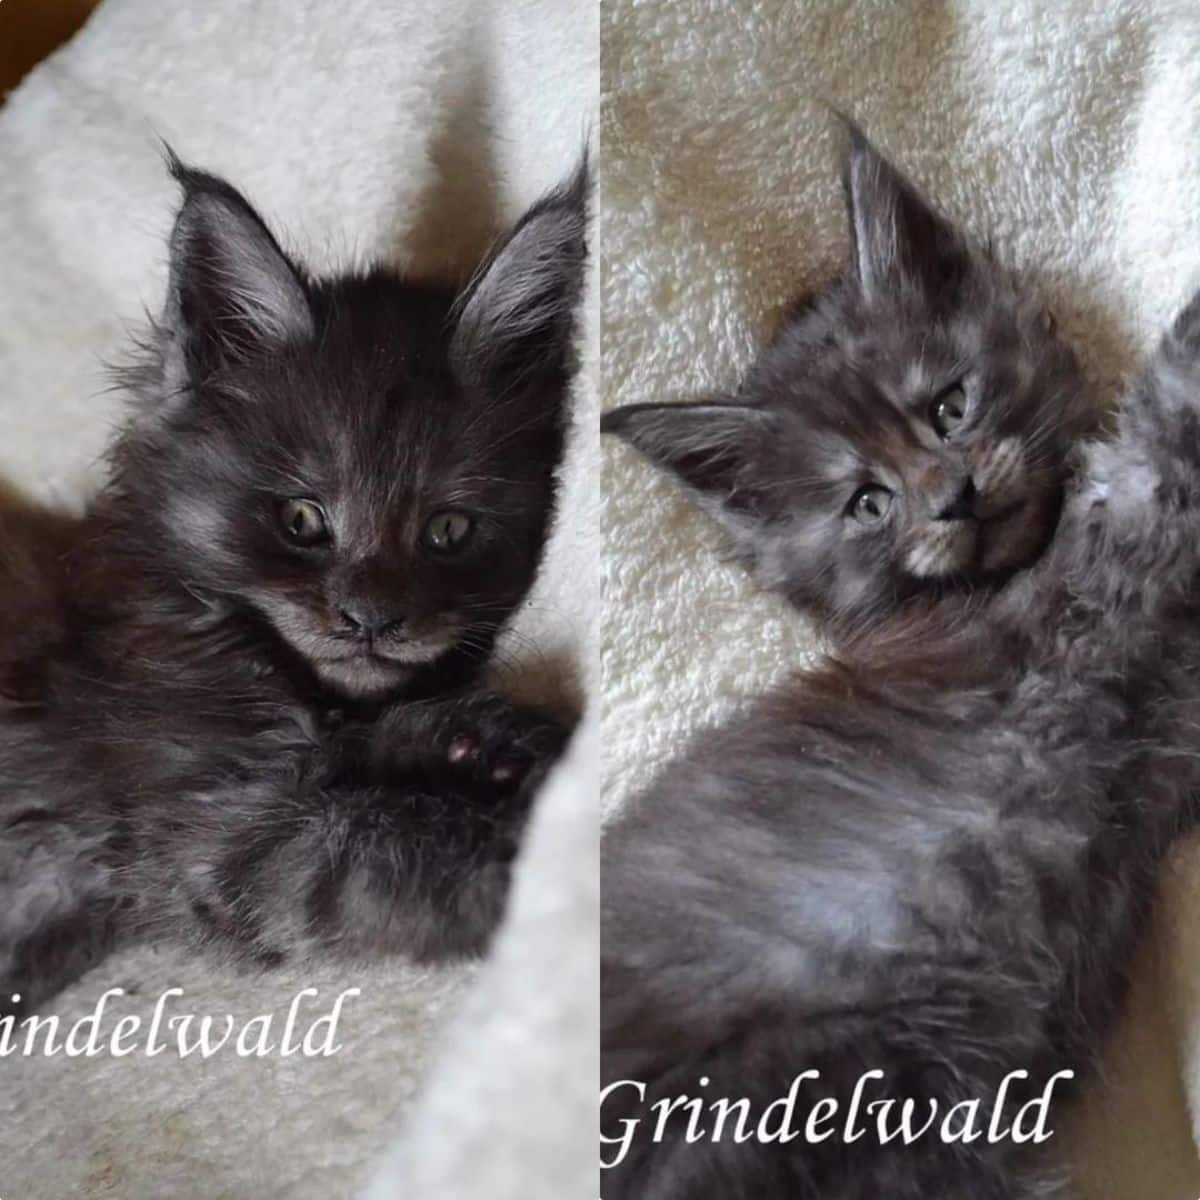 Two images of an adorable black maine coon kitten lying on a blanket.